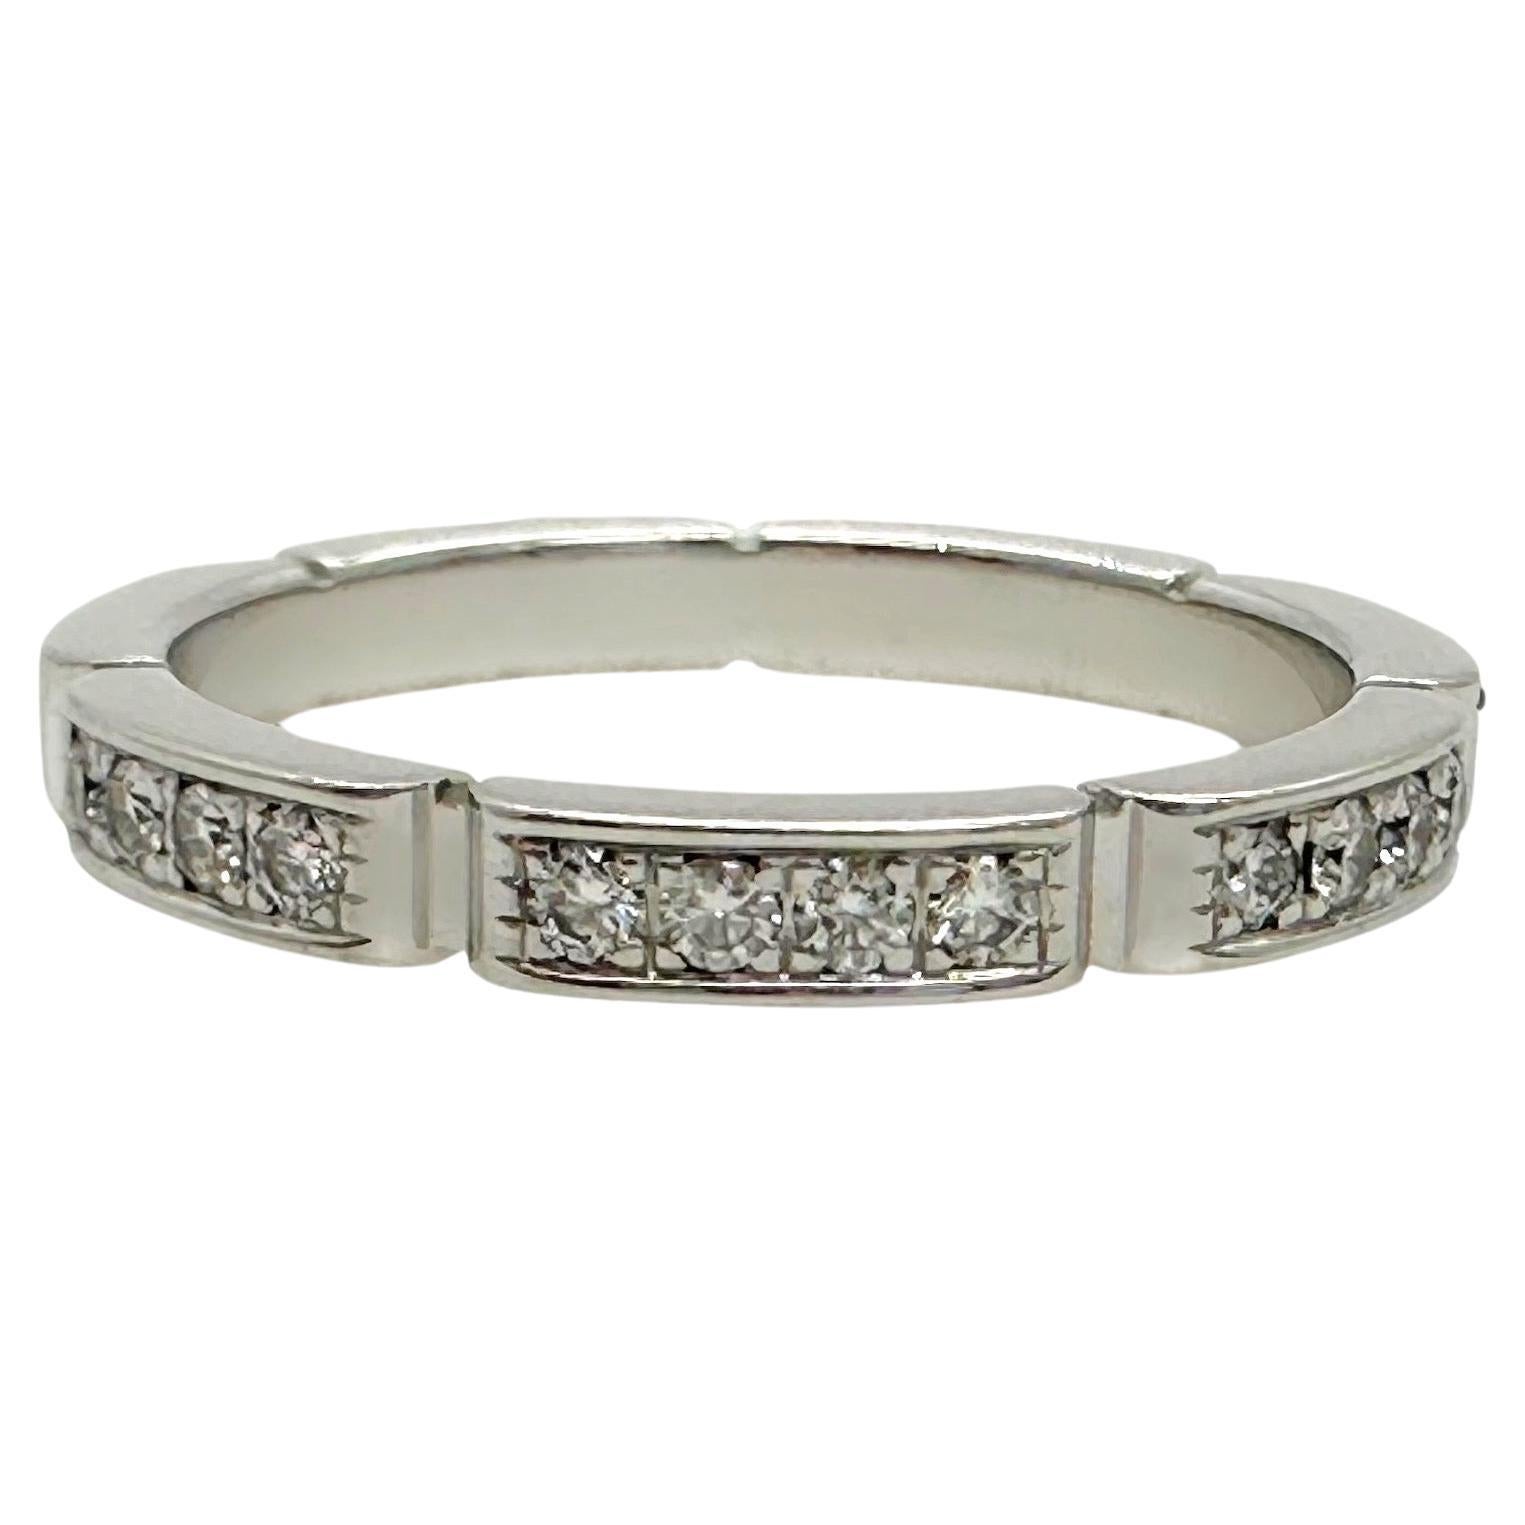 Cartier Maillon Panthere Diamond Wedding Band Ring